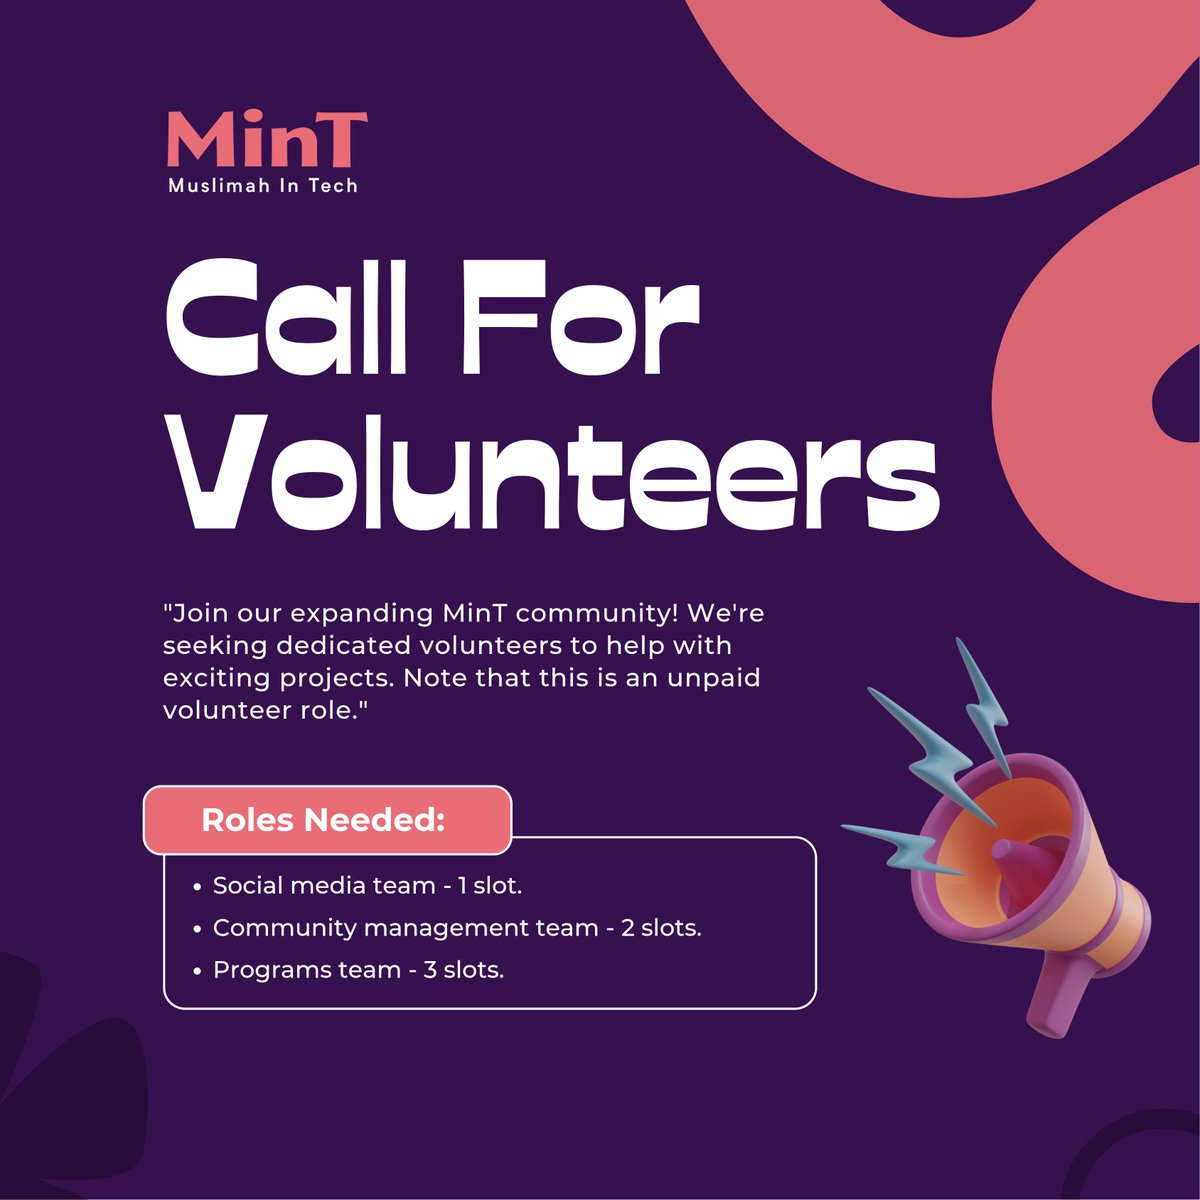 We're expanding our team! To provide better value to our community members, Muslimah in Tech (MinT), calls for volunteers. Read the post to learn more. If you're interested, check the next tweet for the application link.